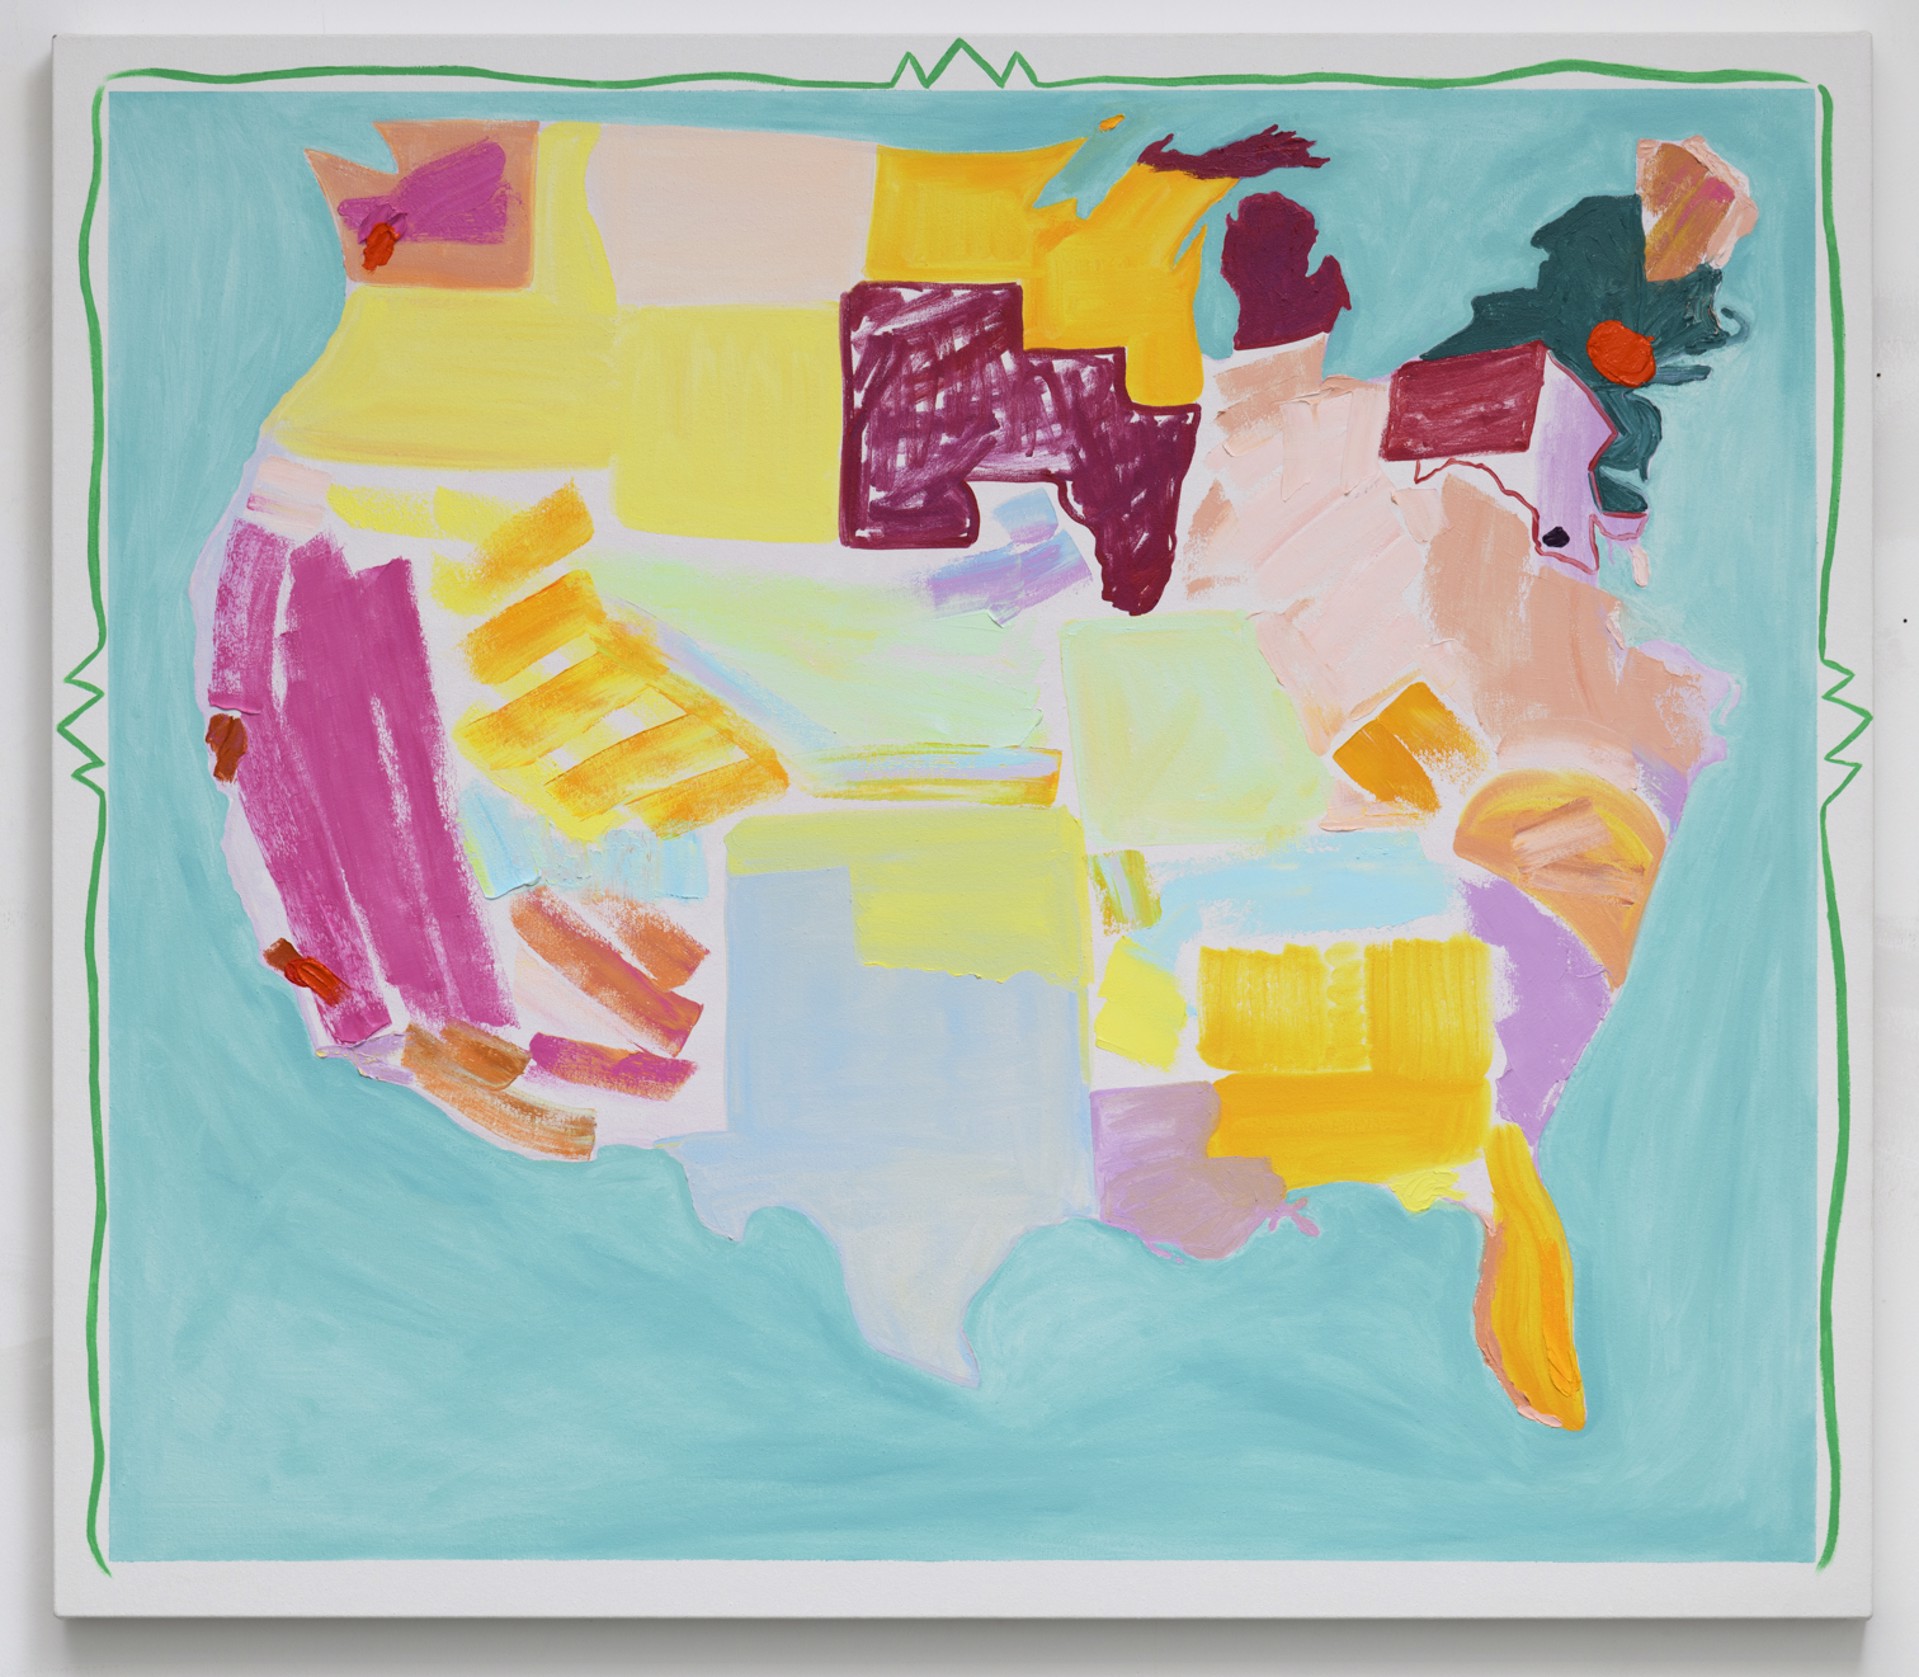 USA Spring Map by Susan Lizotte